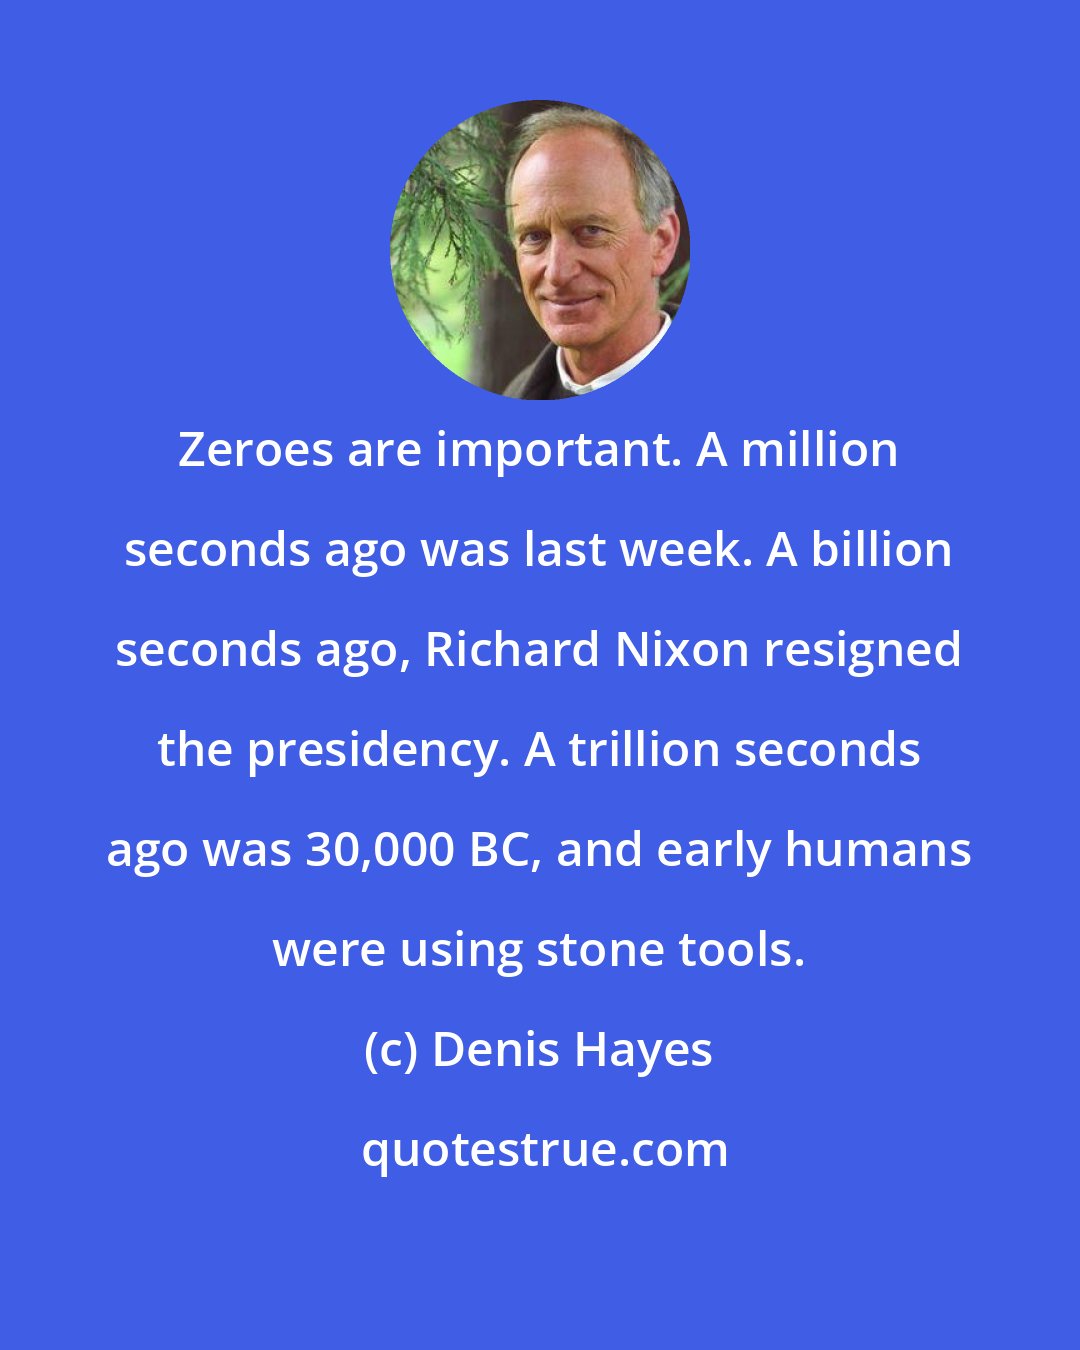 Denis Hayes: Zeroes are important. A million seconds ago was last week. A billion seconds ago, Richard Nixon resigned the presidency. A trillion seconds ago was 30,000 BC, and early humans were using stone tools.